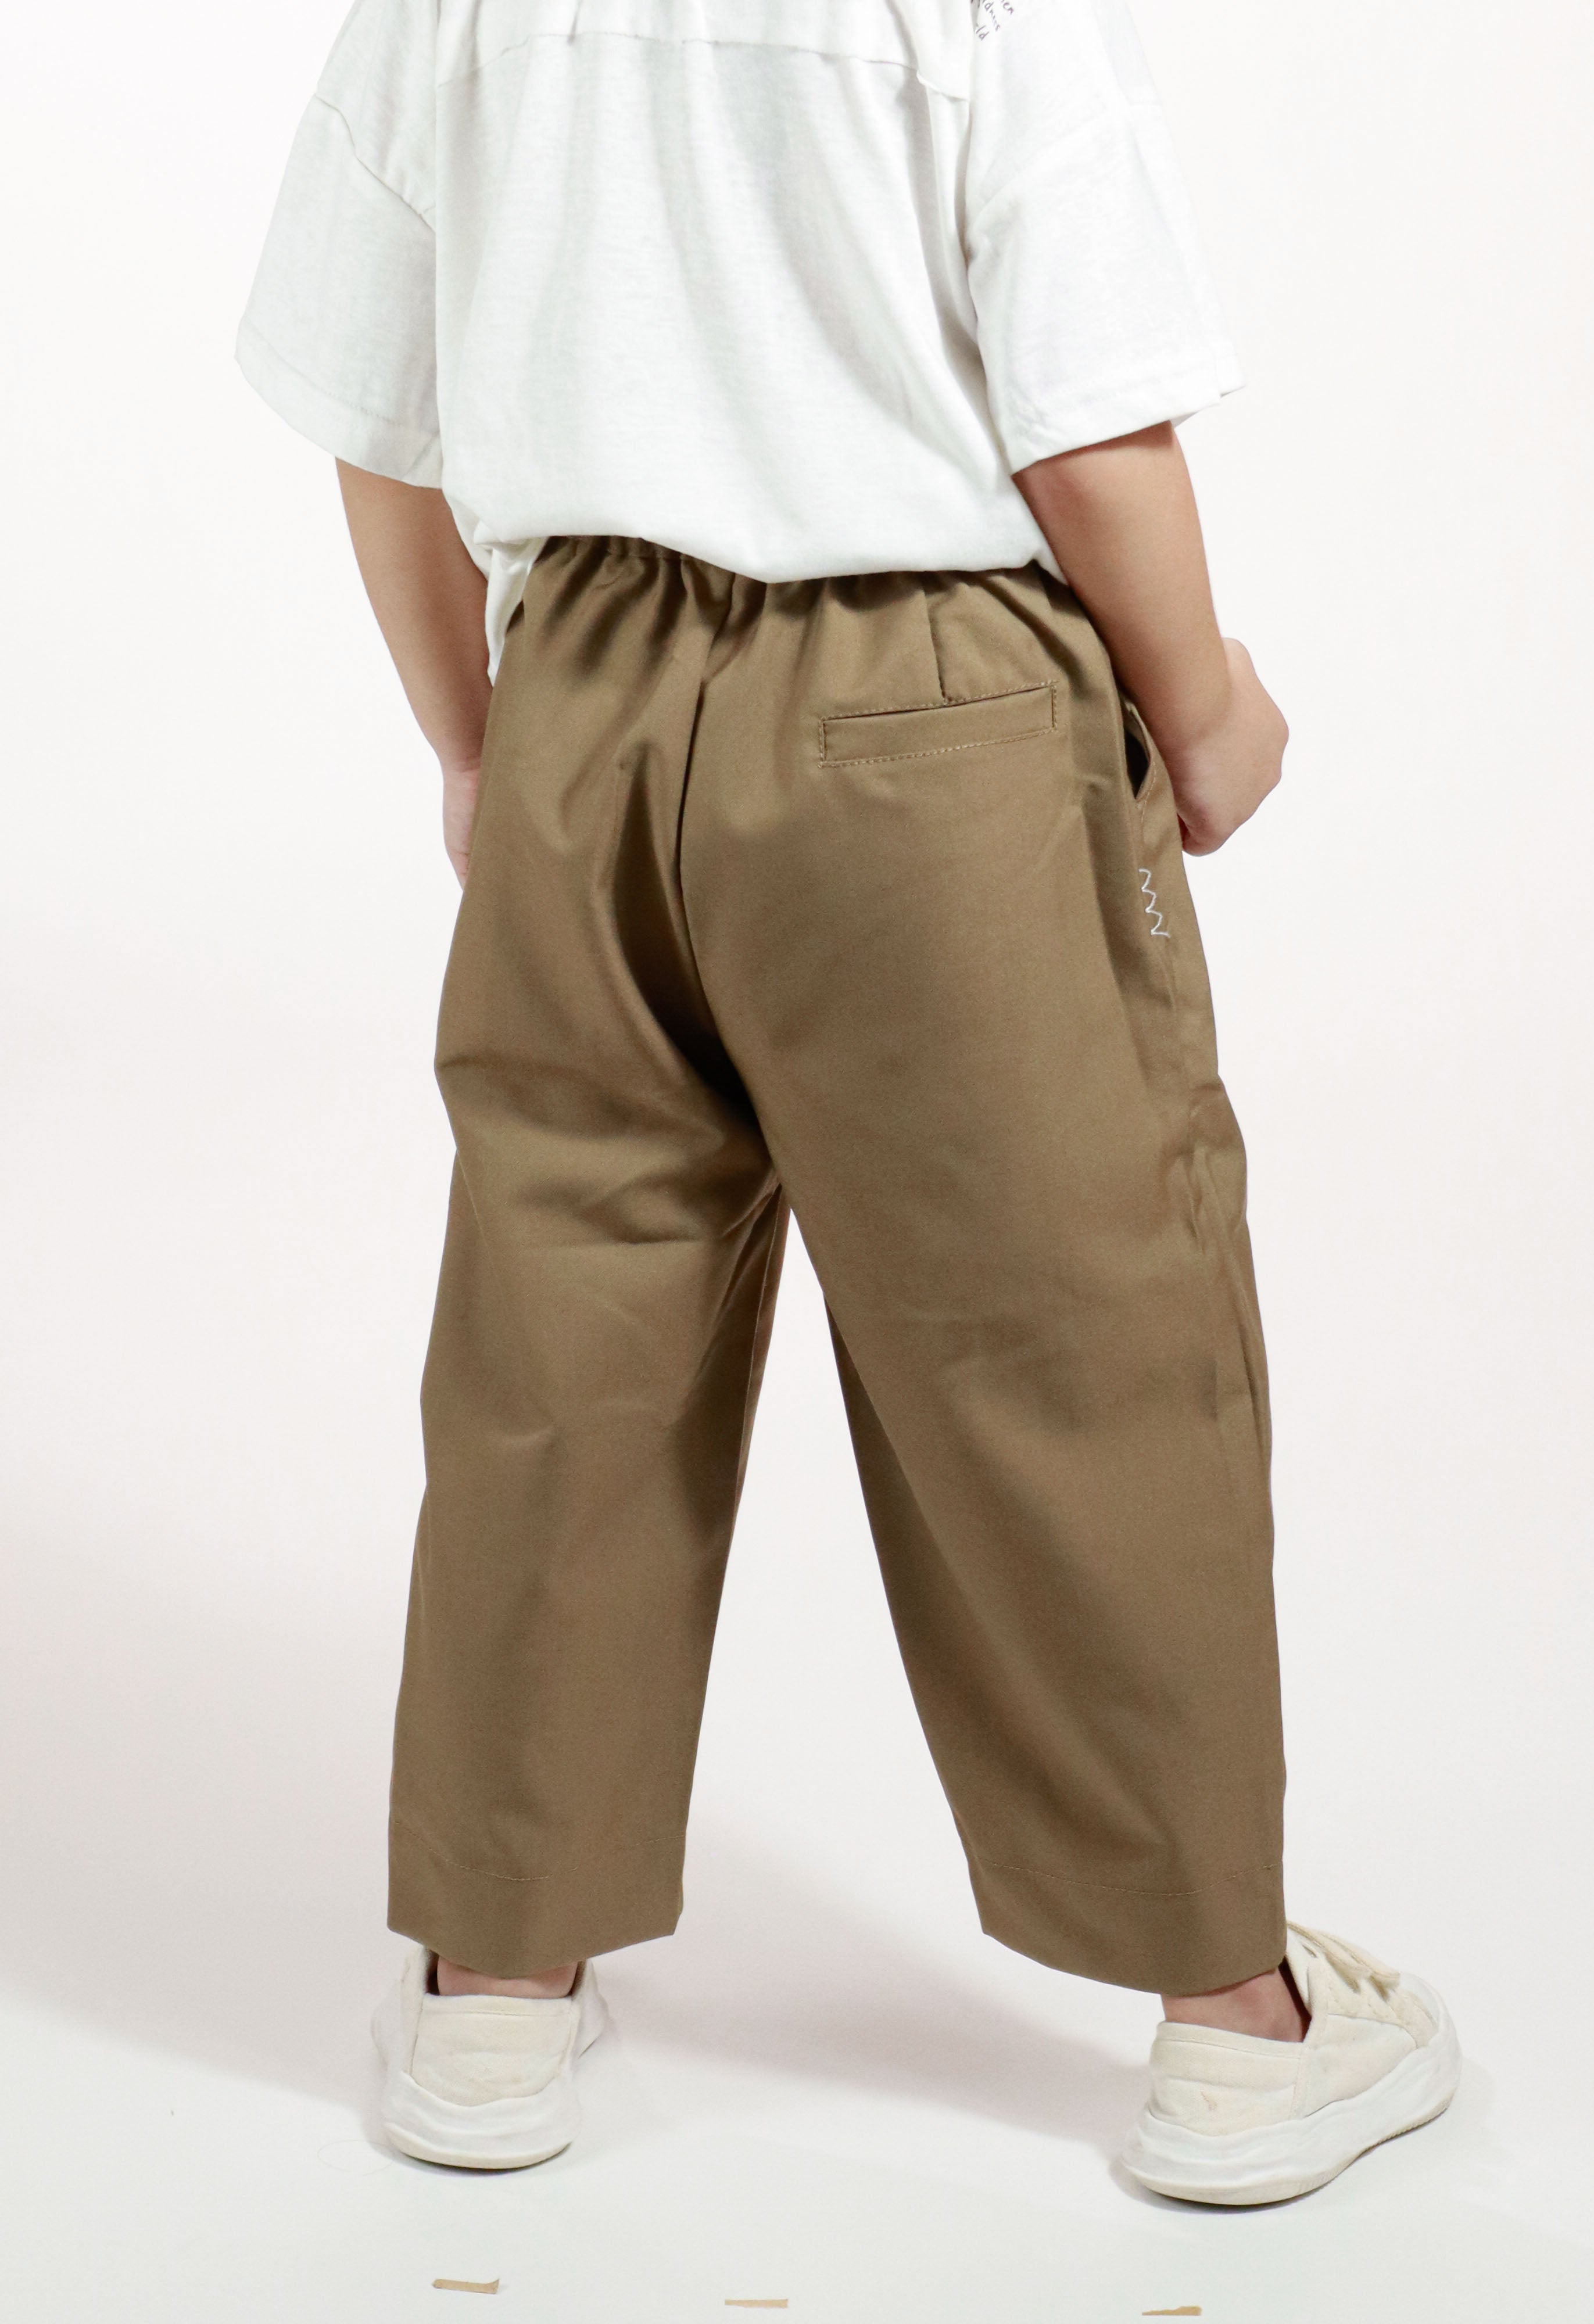 Resume Home Embroidery Suit Trousers (Ready Stock)